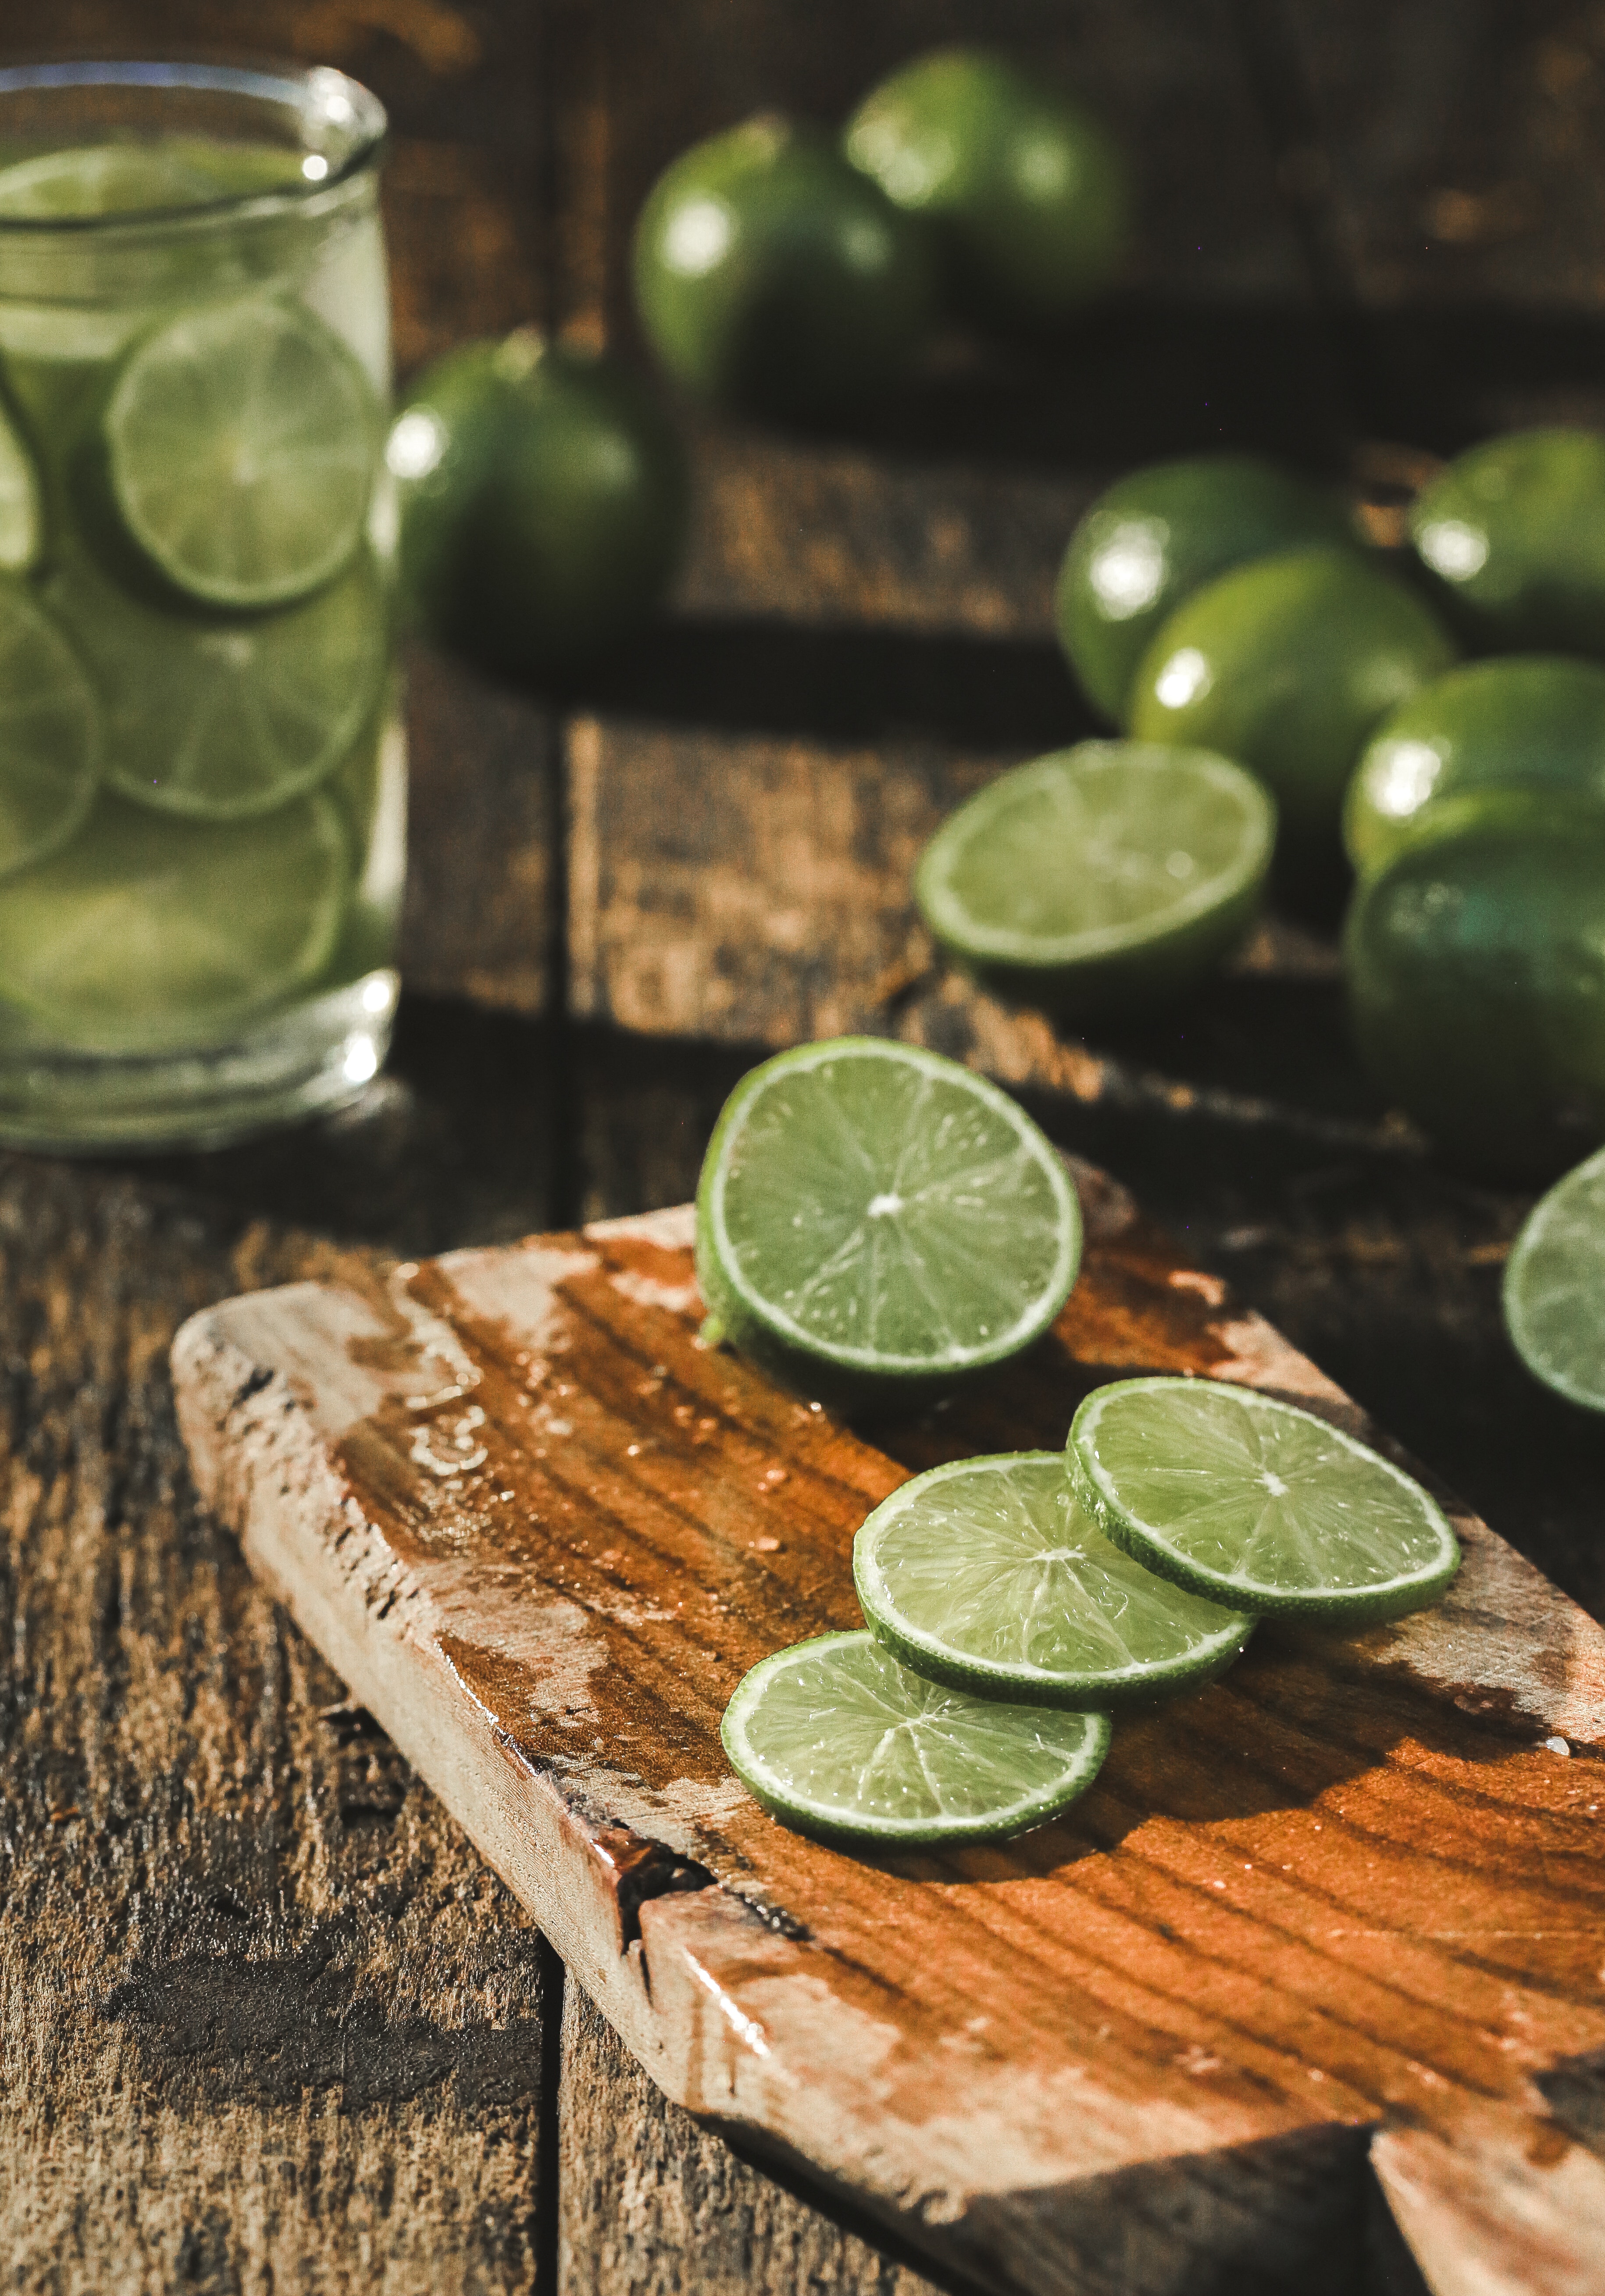 Slices of limes on a brown wood chopper